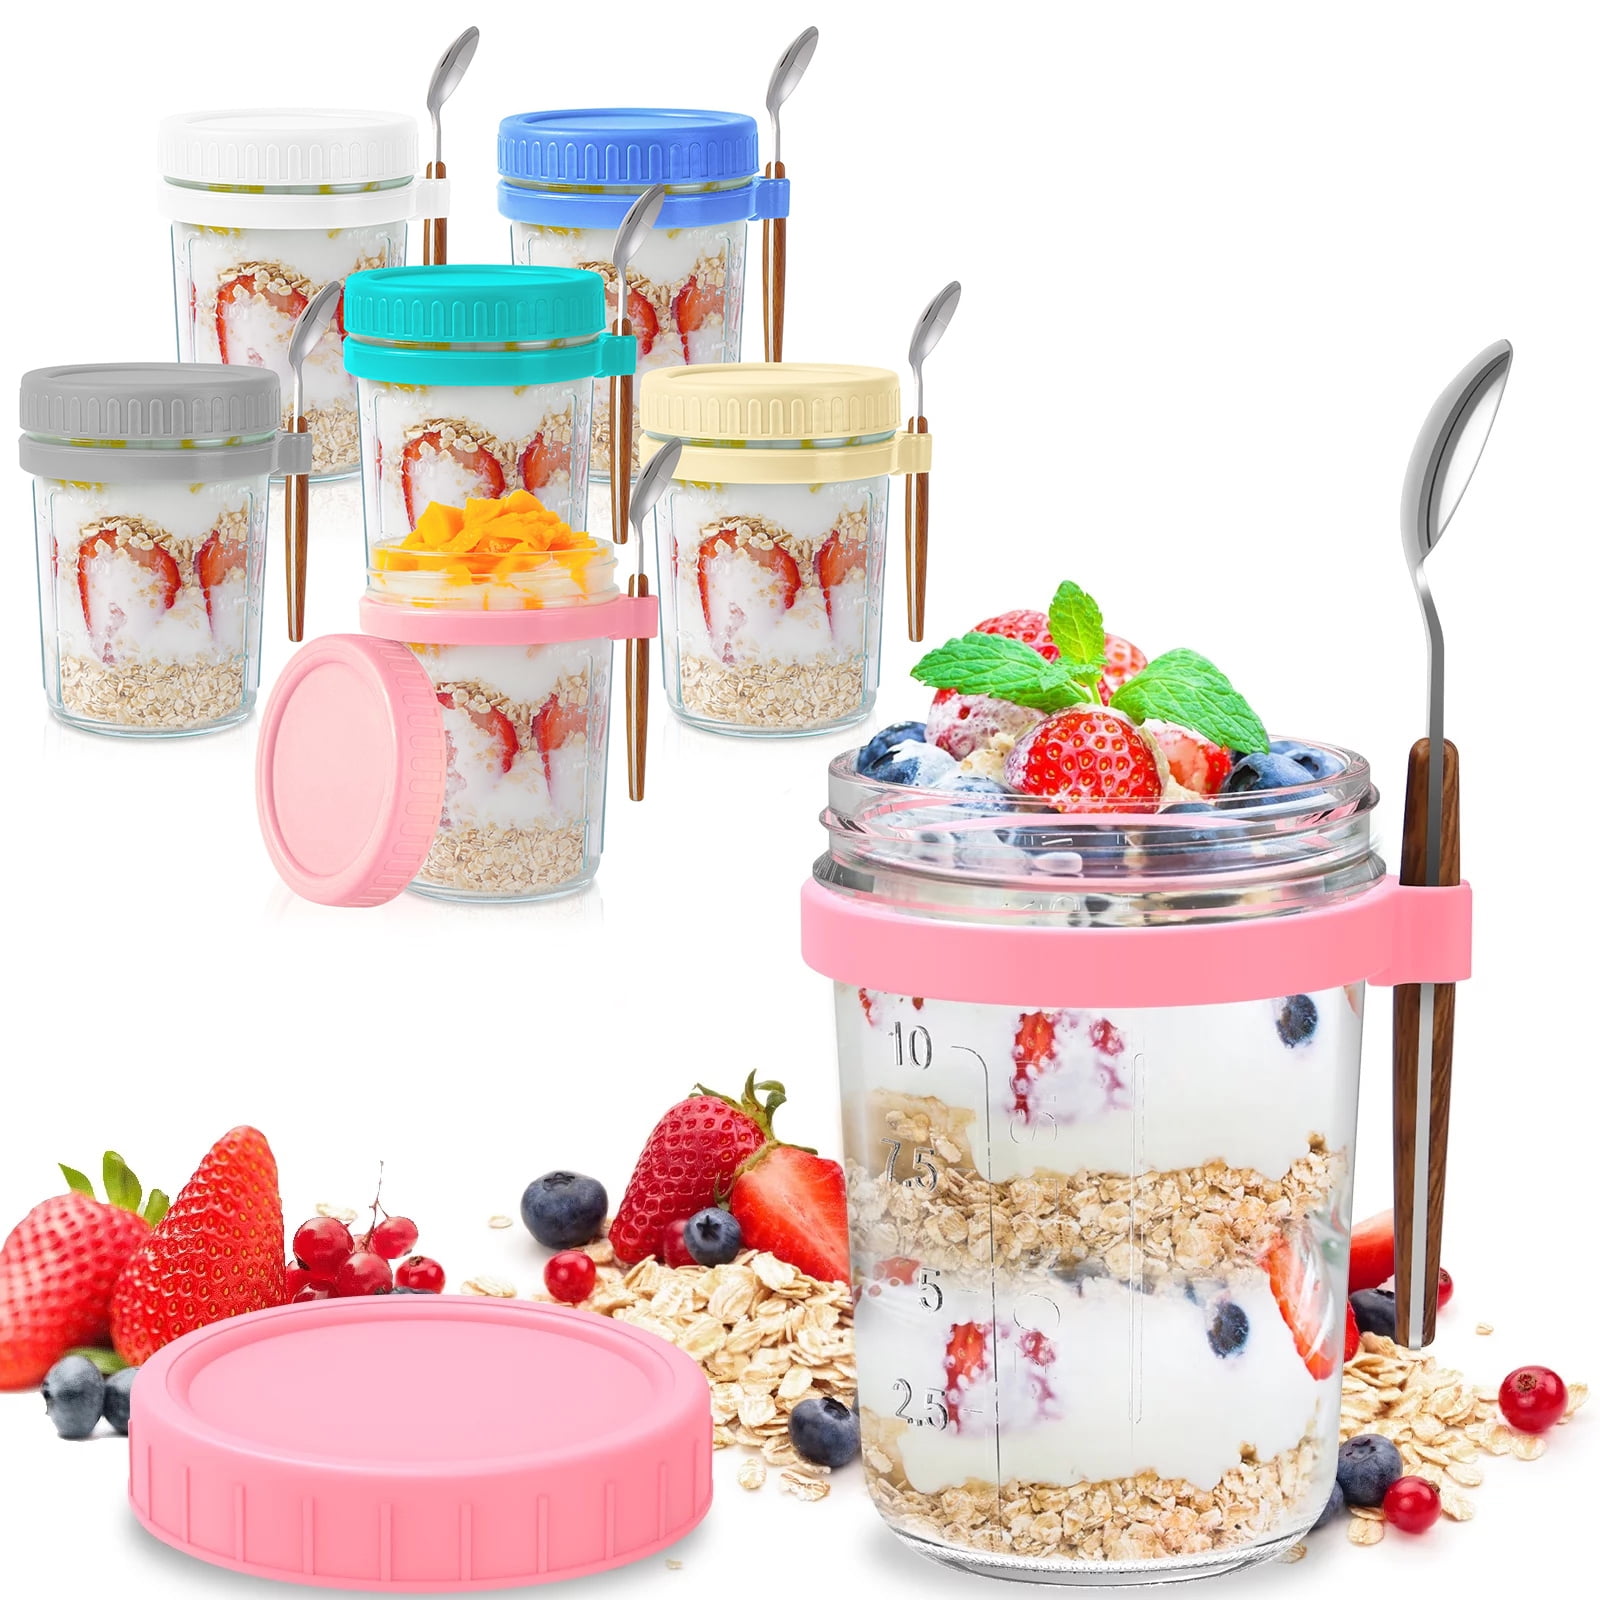 Sumind 6 Pack Overnight Oats Containers with Lids and Spoons 10 oz